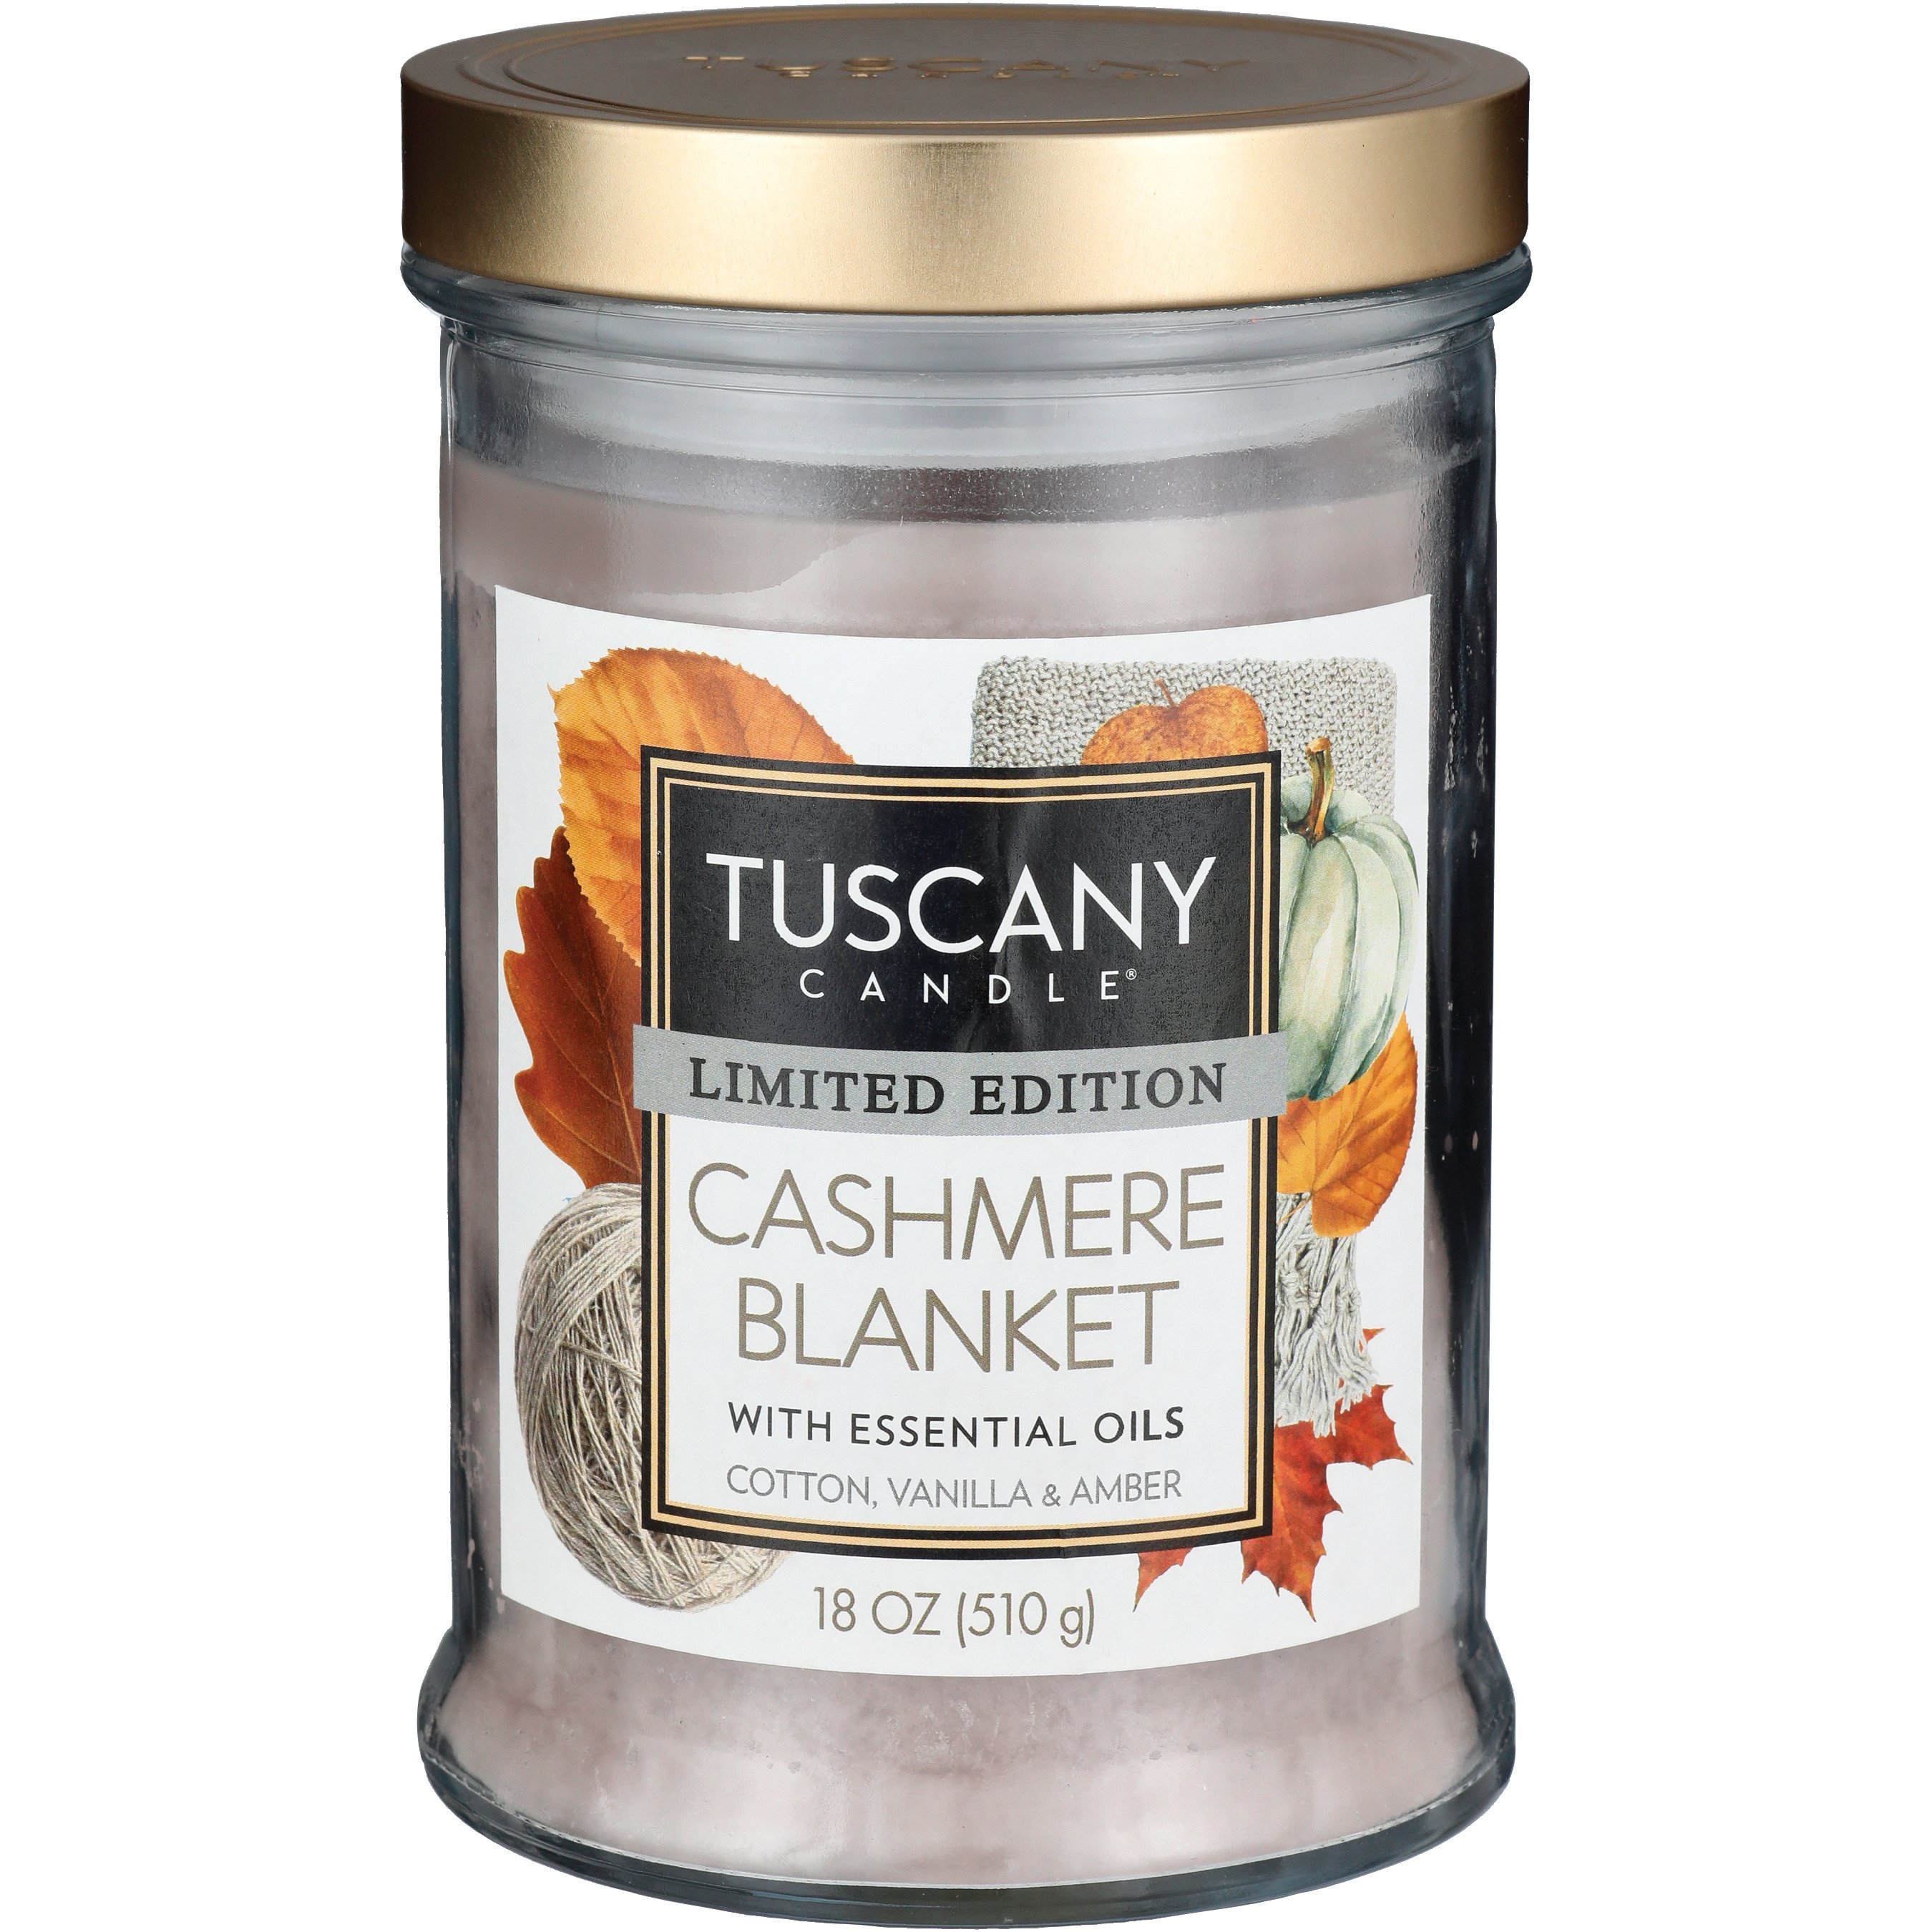 Tuscany Candle Sea & Sand Scented Candle